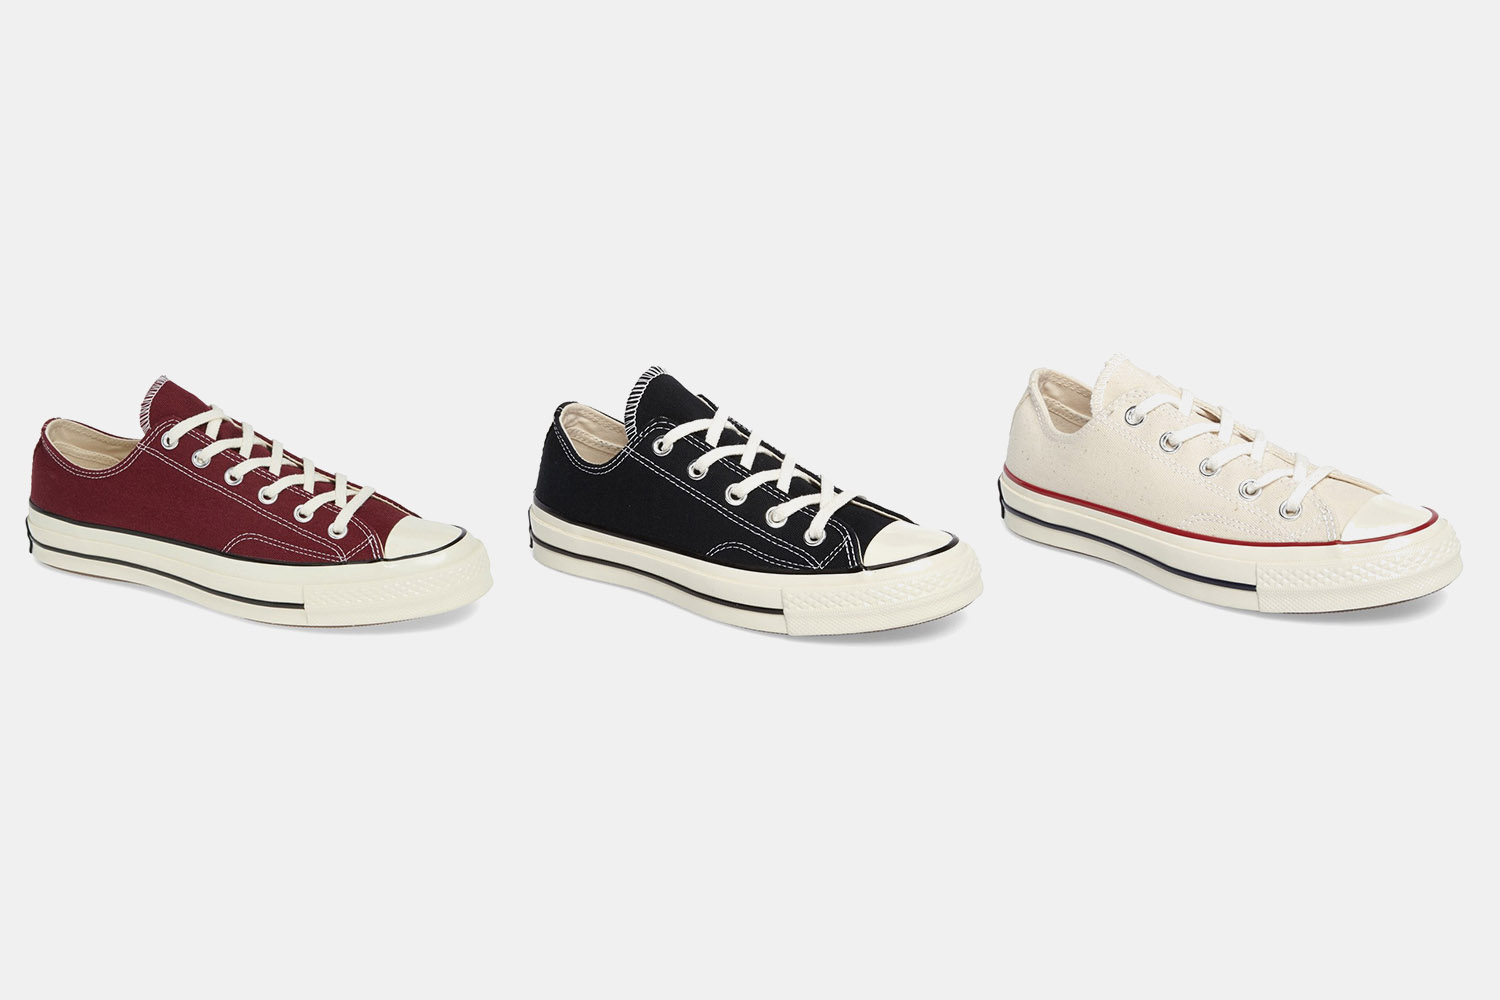 Deal: Converse All Star 70s Are the Superior Chucks - InsideHook